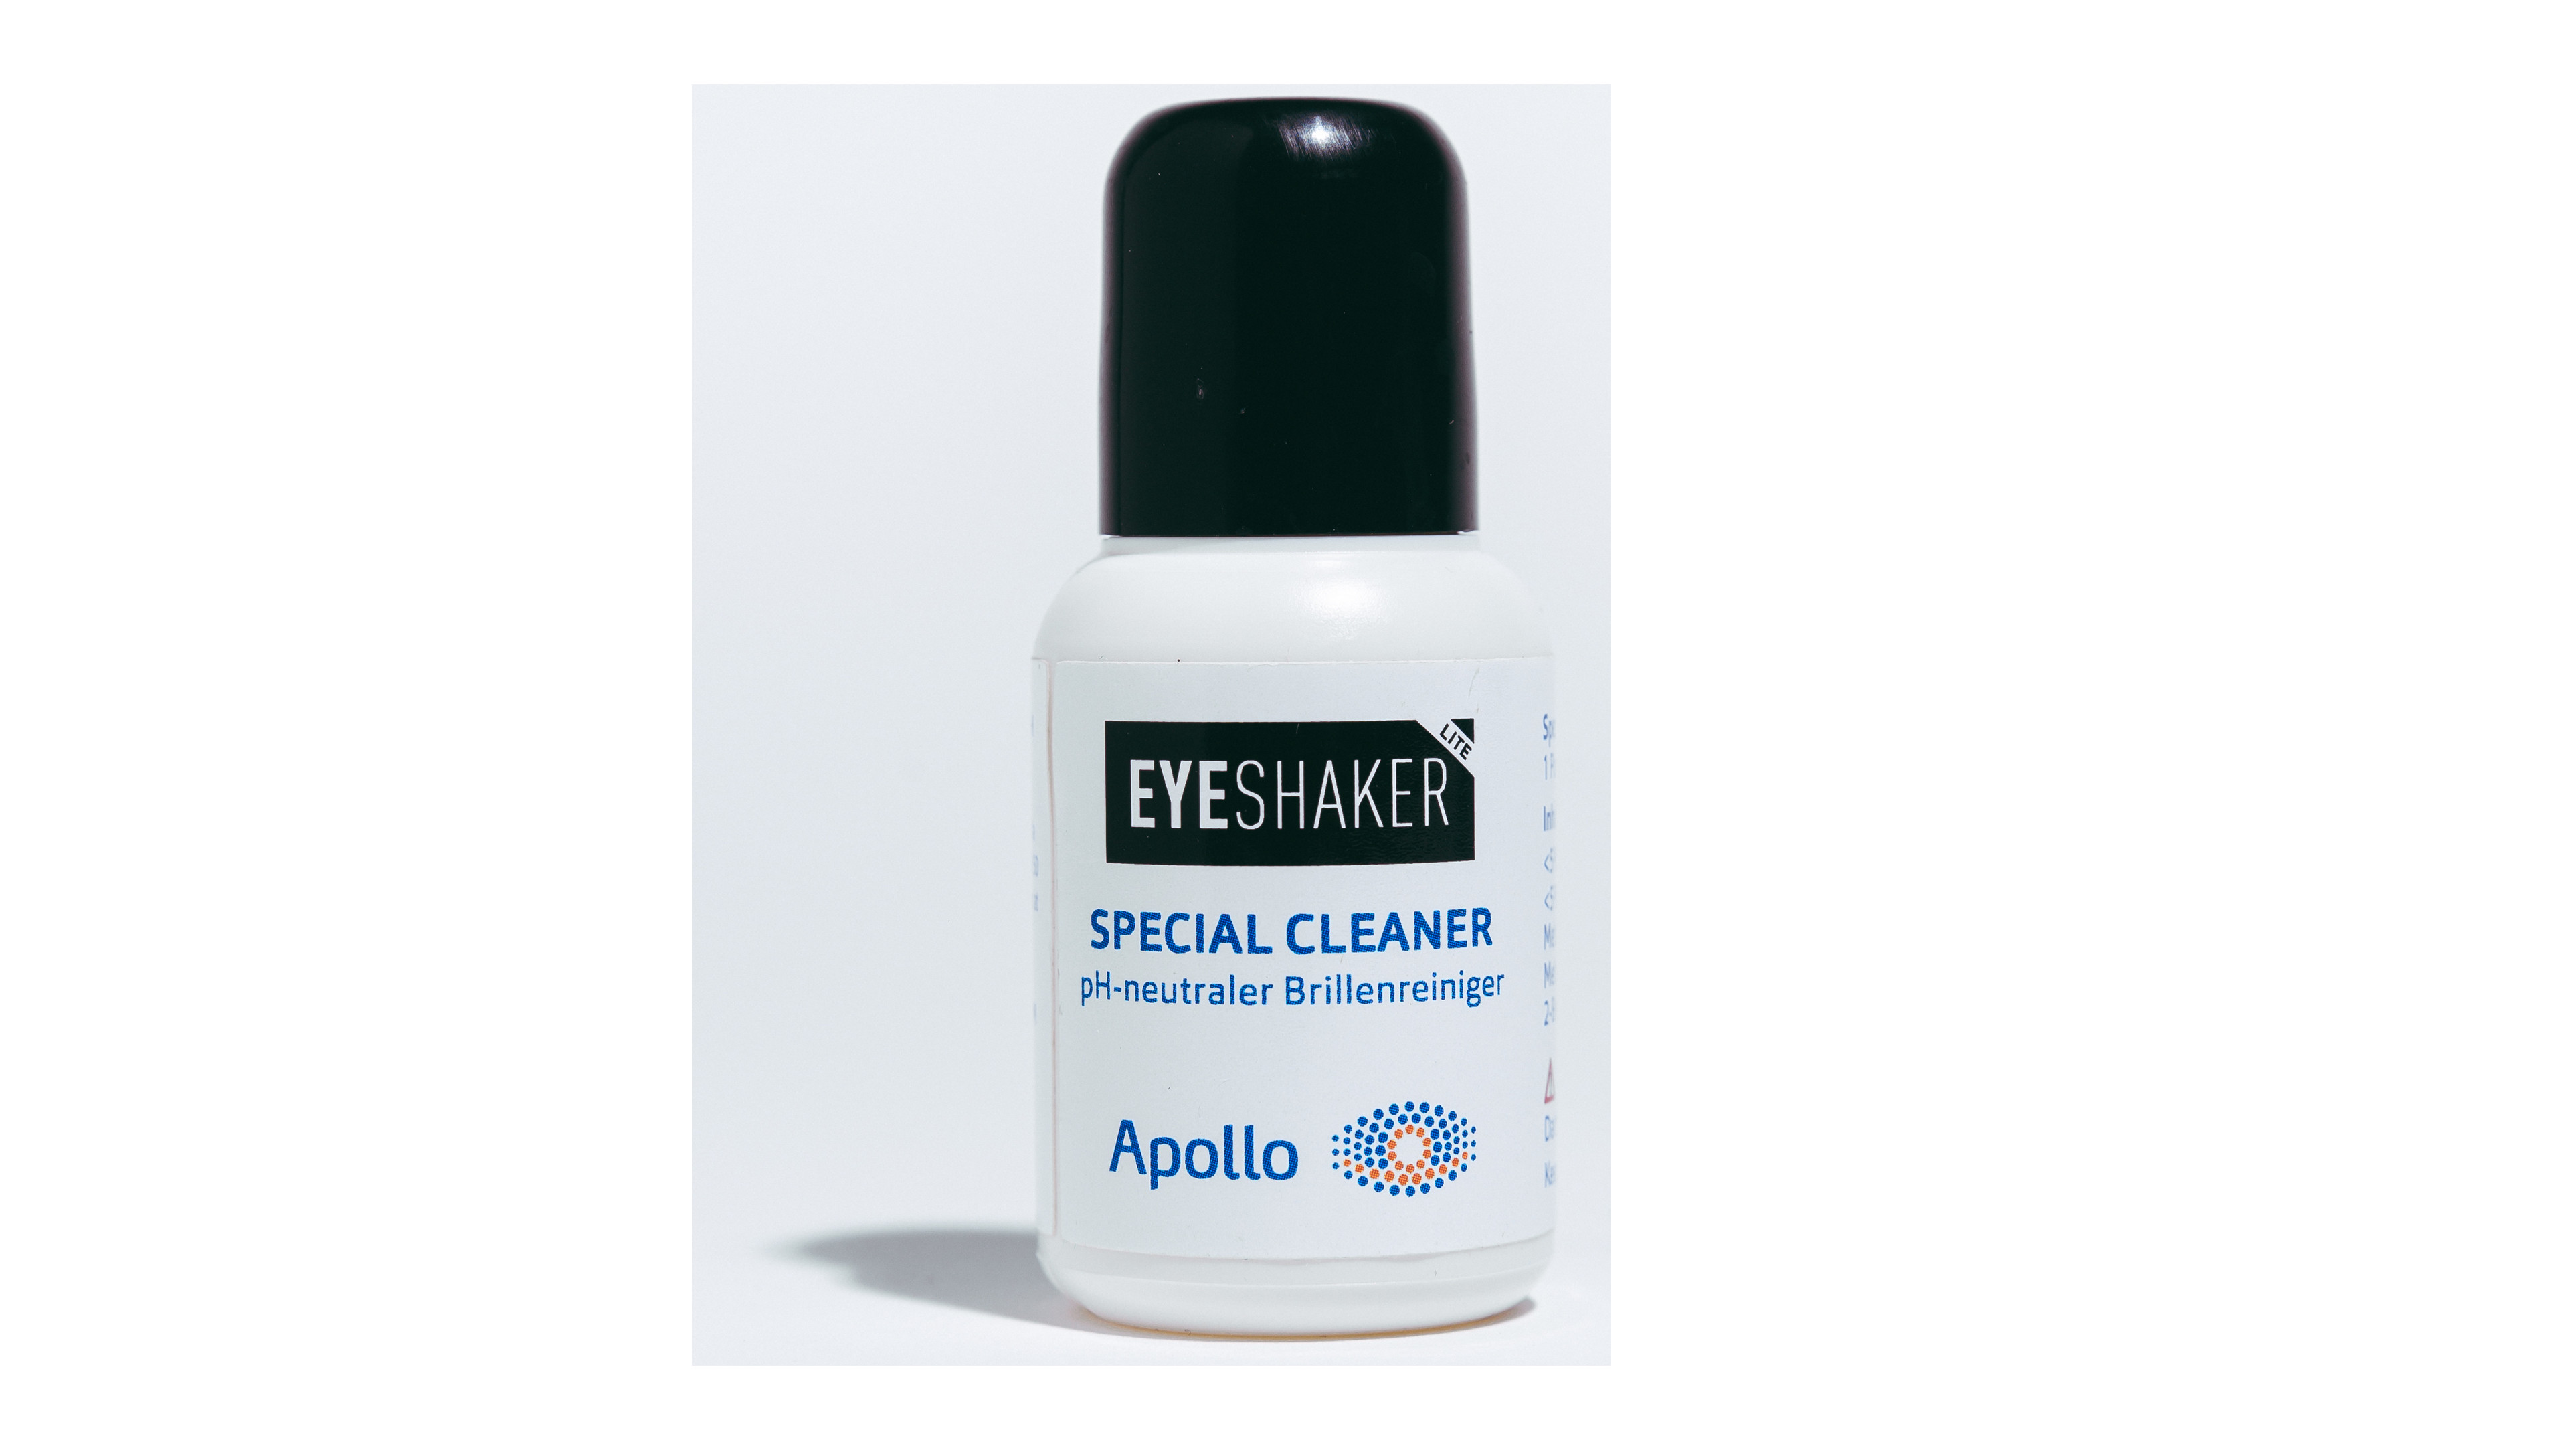 [products.image.front] Apollo Cleaning Fluid AO Accessoire